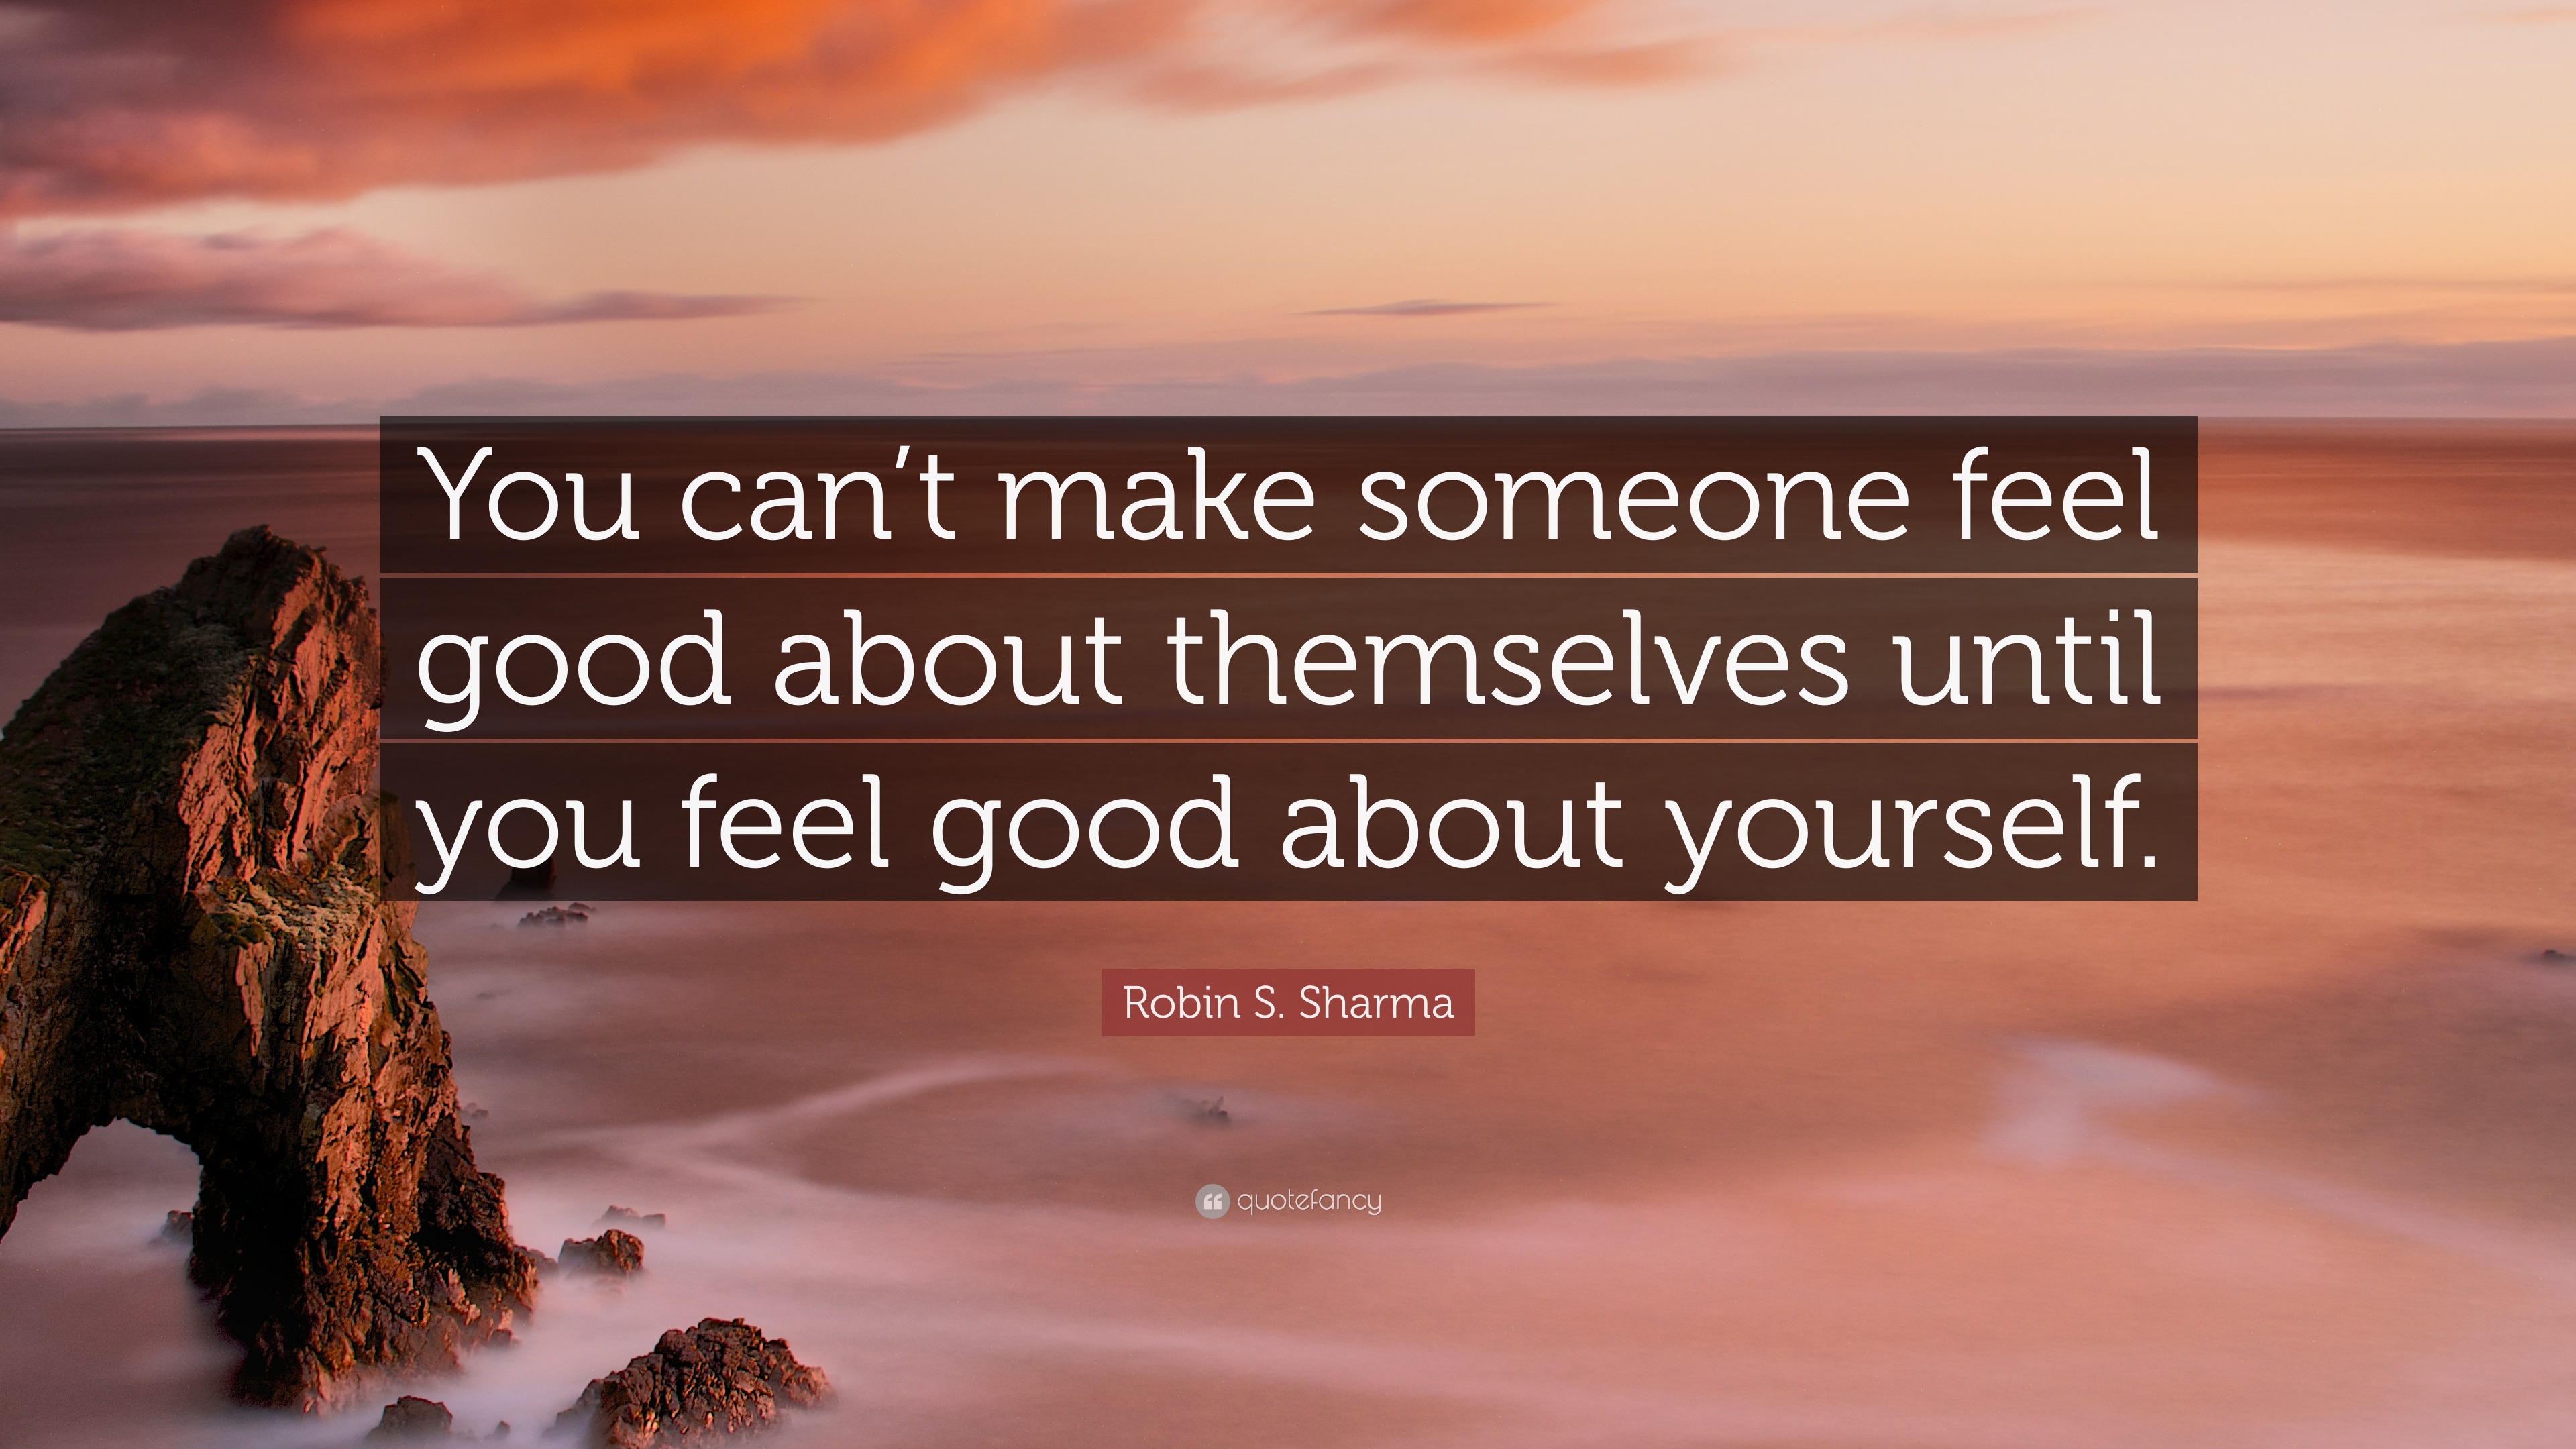 Robin S. Sharma Quote: “You can’t make someone feel good ...